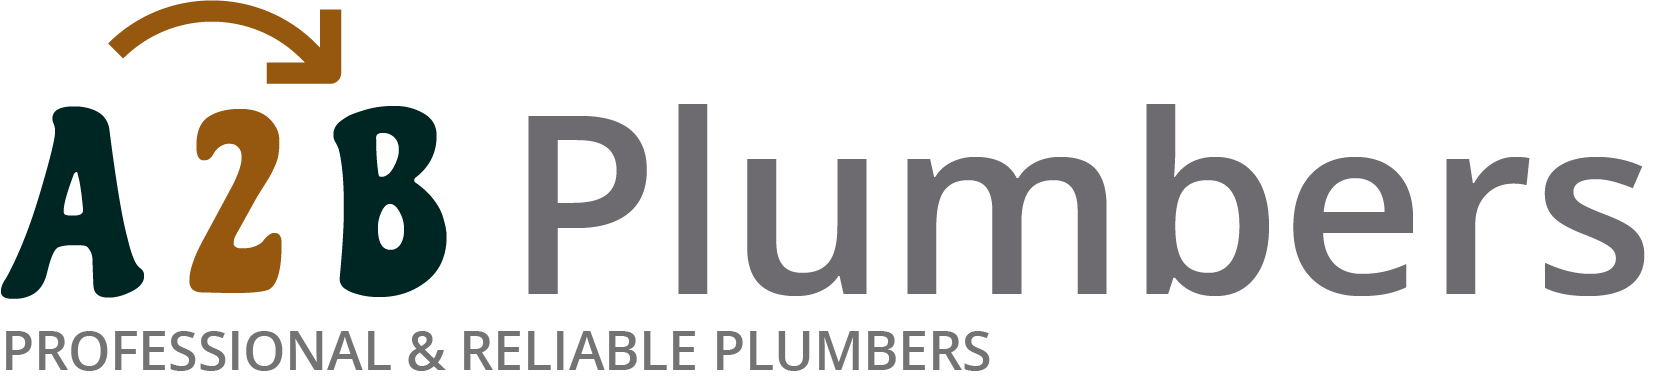 If you need a boiler installed, a radiator repaired or a leaking tap fixed, call us now - we provide services for properties in Kirkburton and the local area.